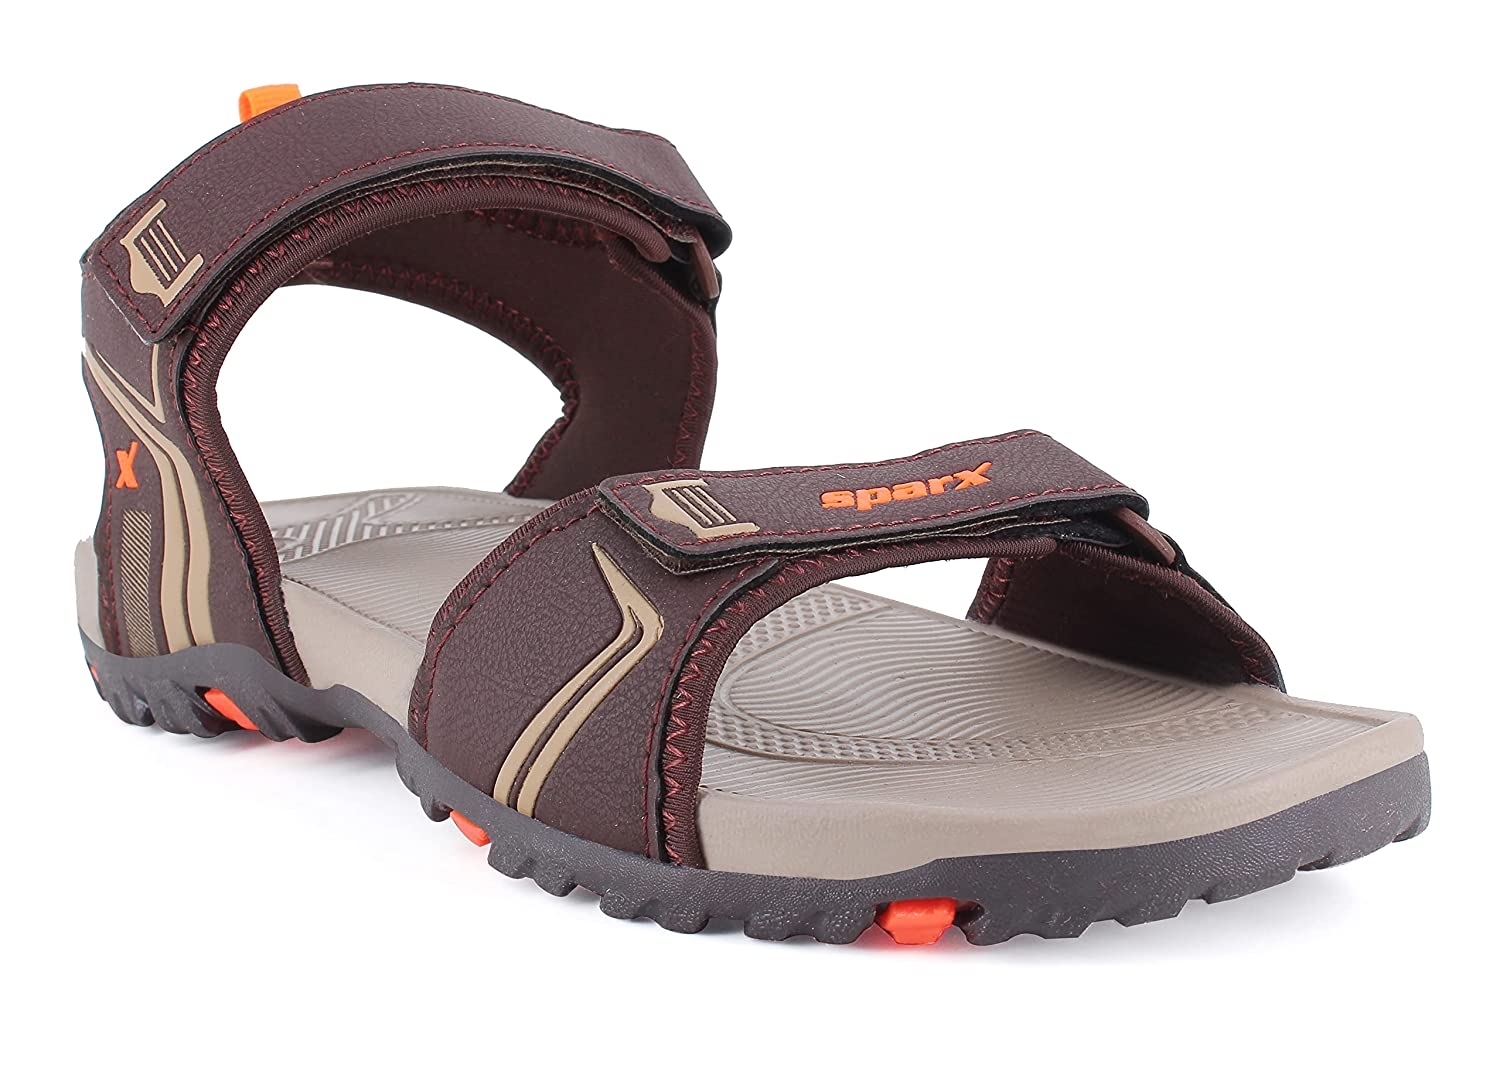 Buy sparx sandals for men in India @ Limeroad